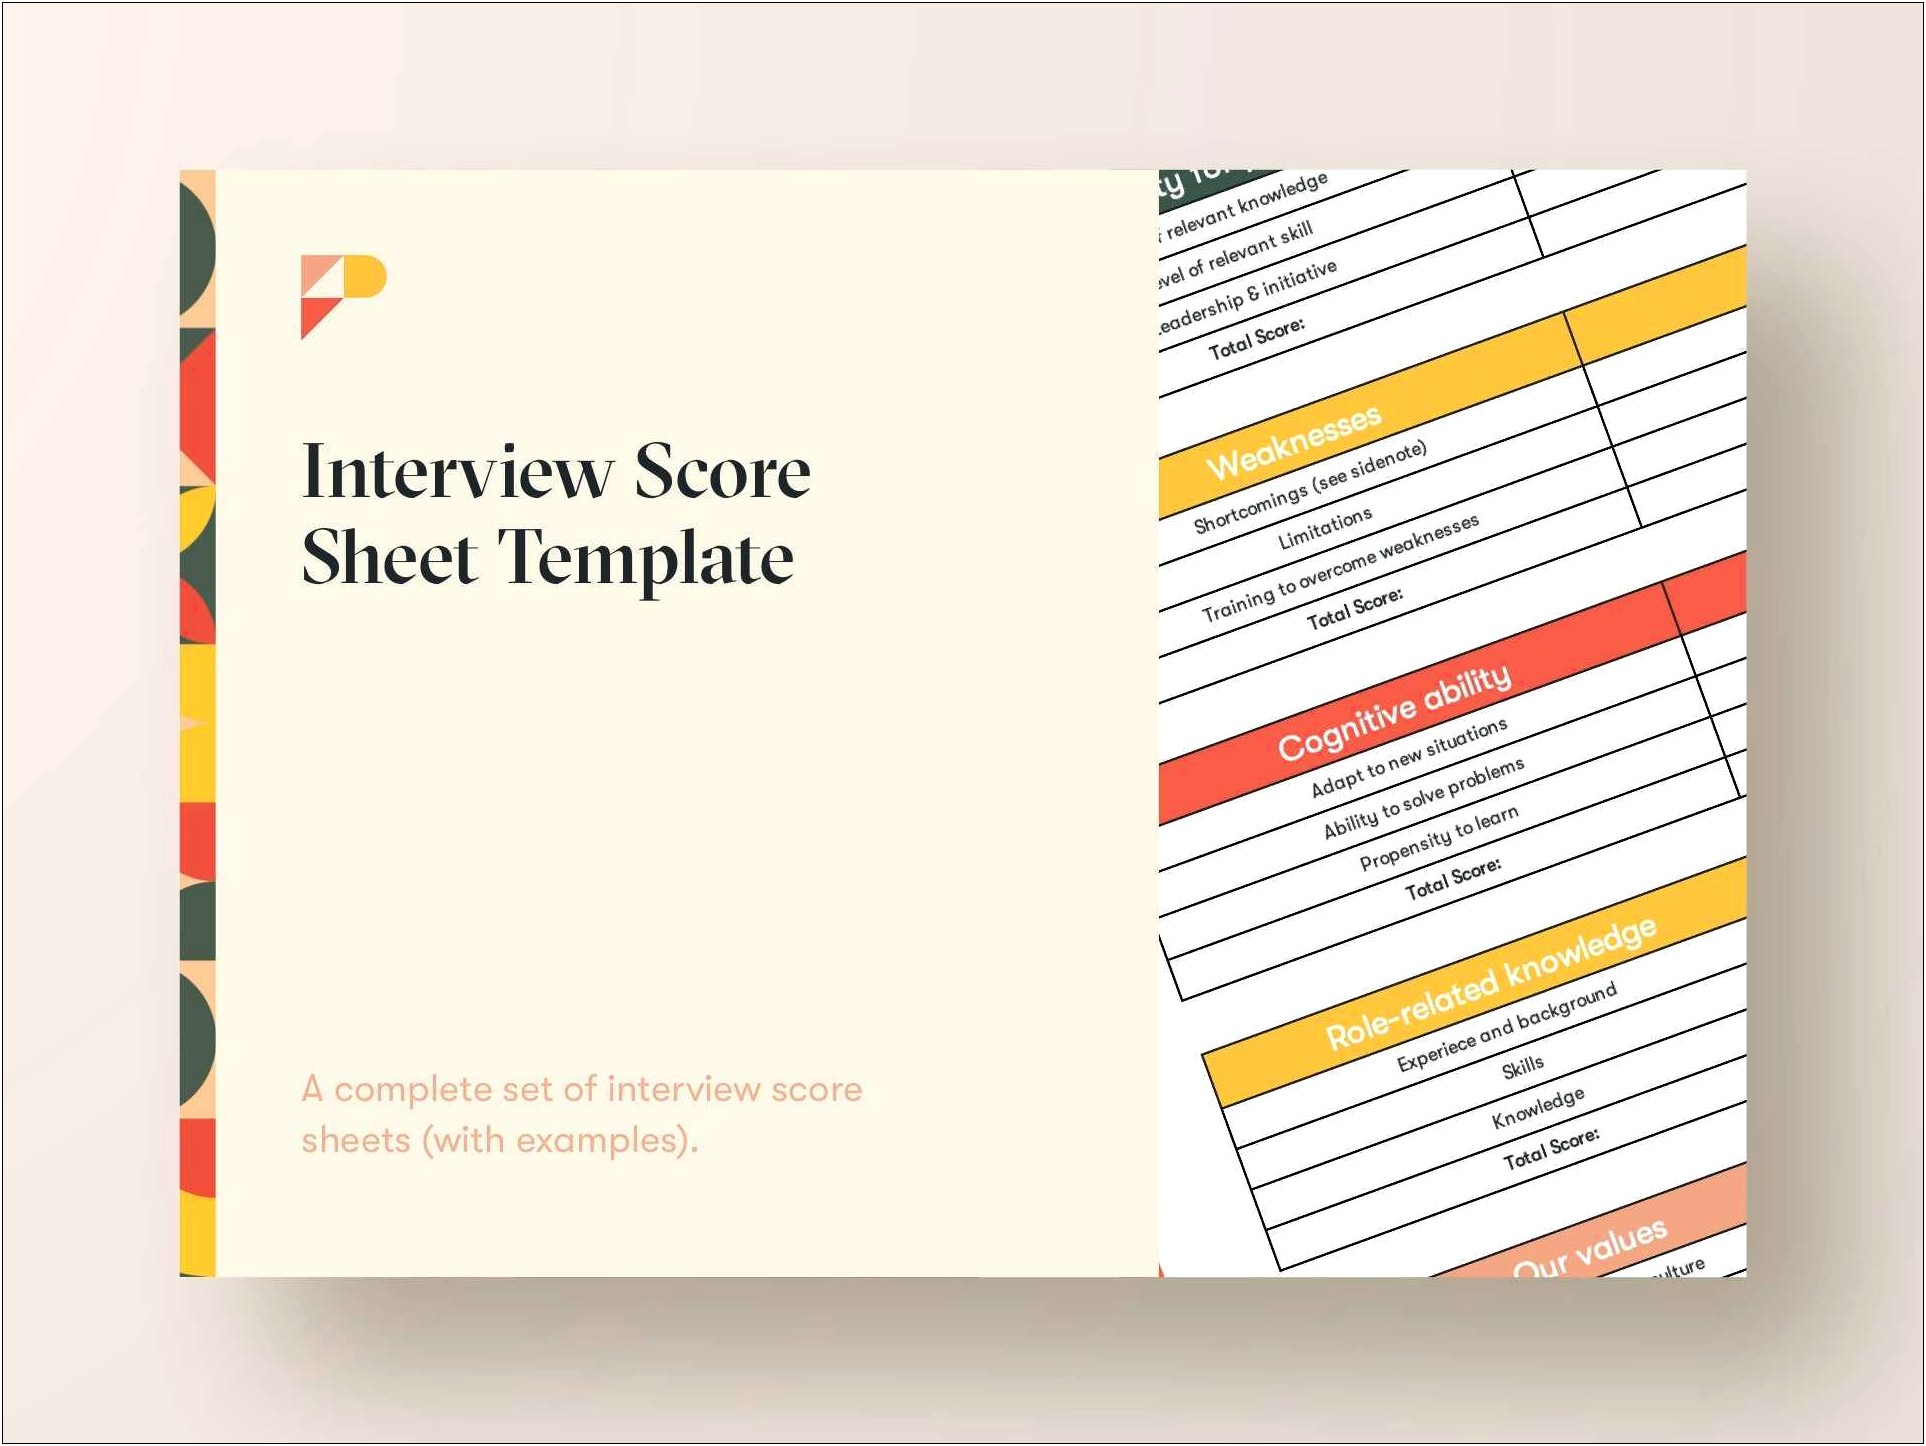 Sample Resume And Interview Score Sheet